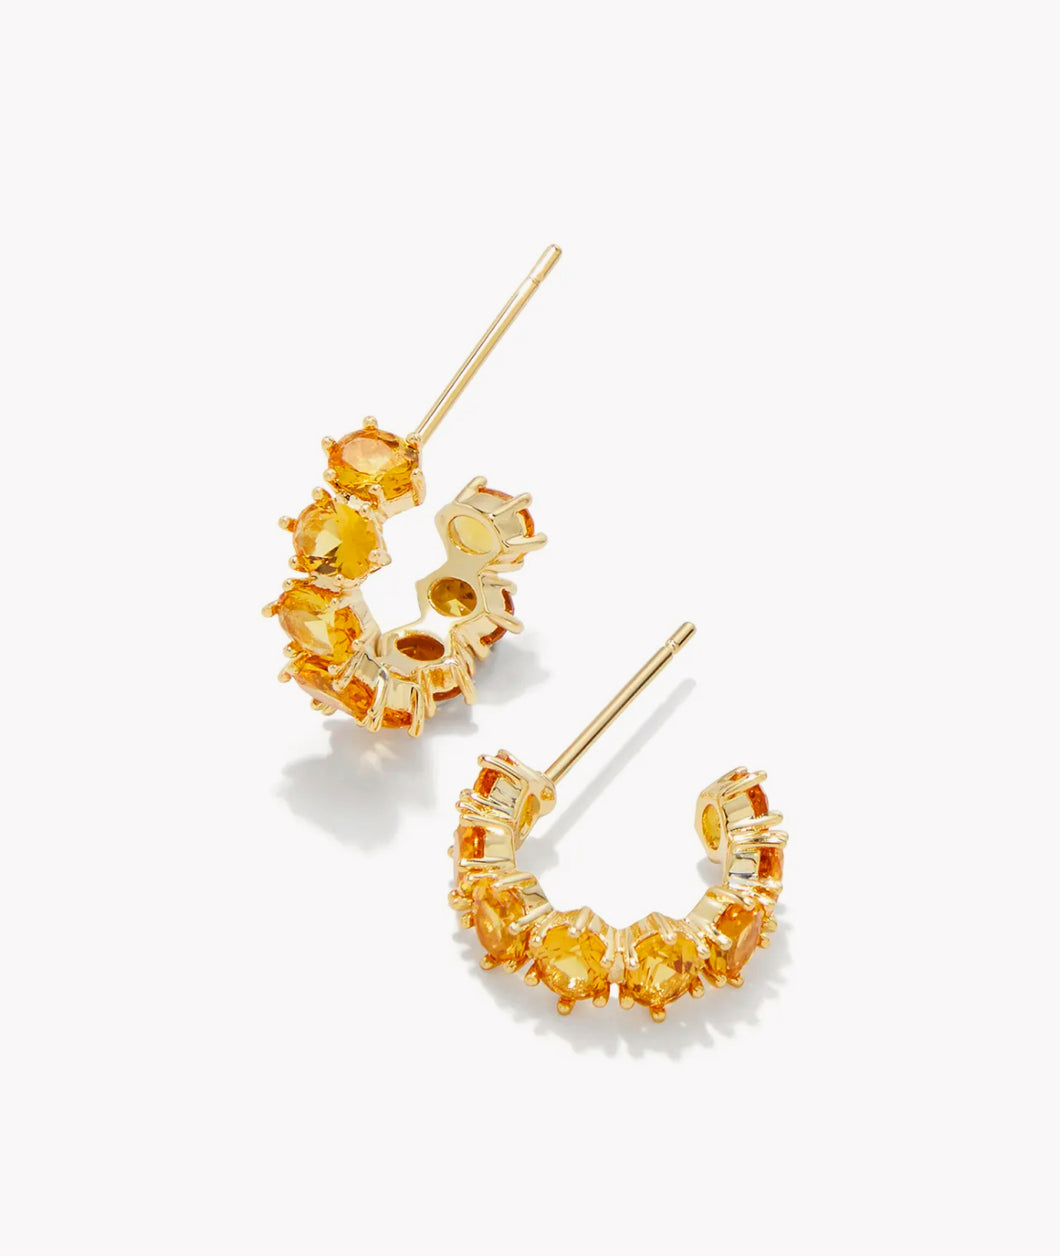 Kendra Scott: Cailin Gold Crystal Huggie Earrings in Golden Yellow Crystal